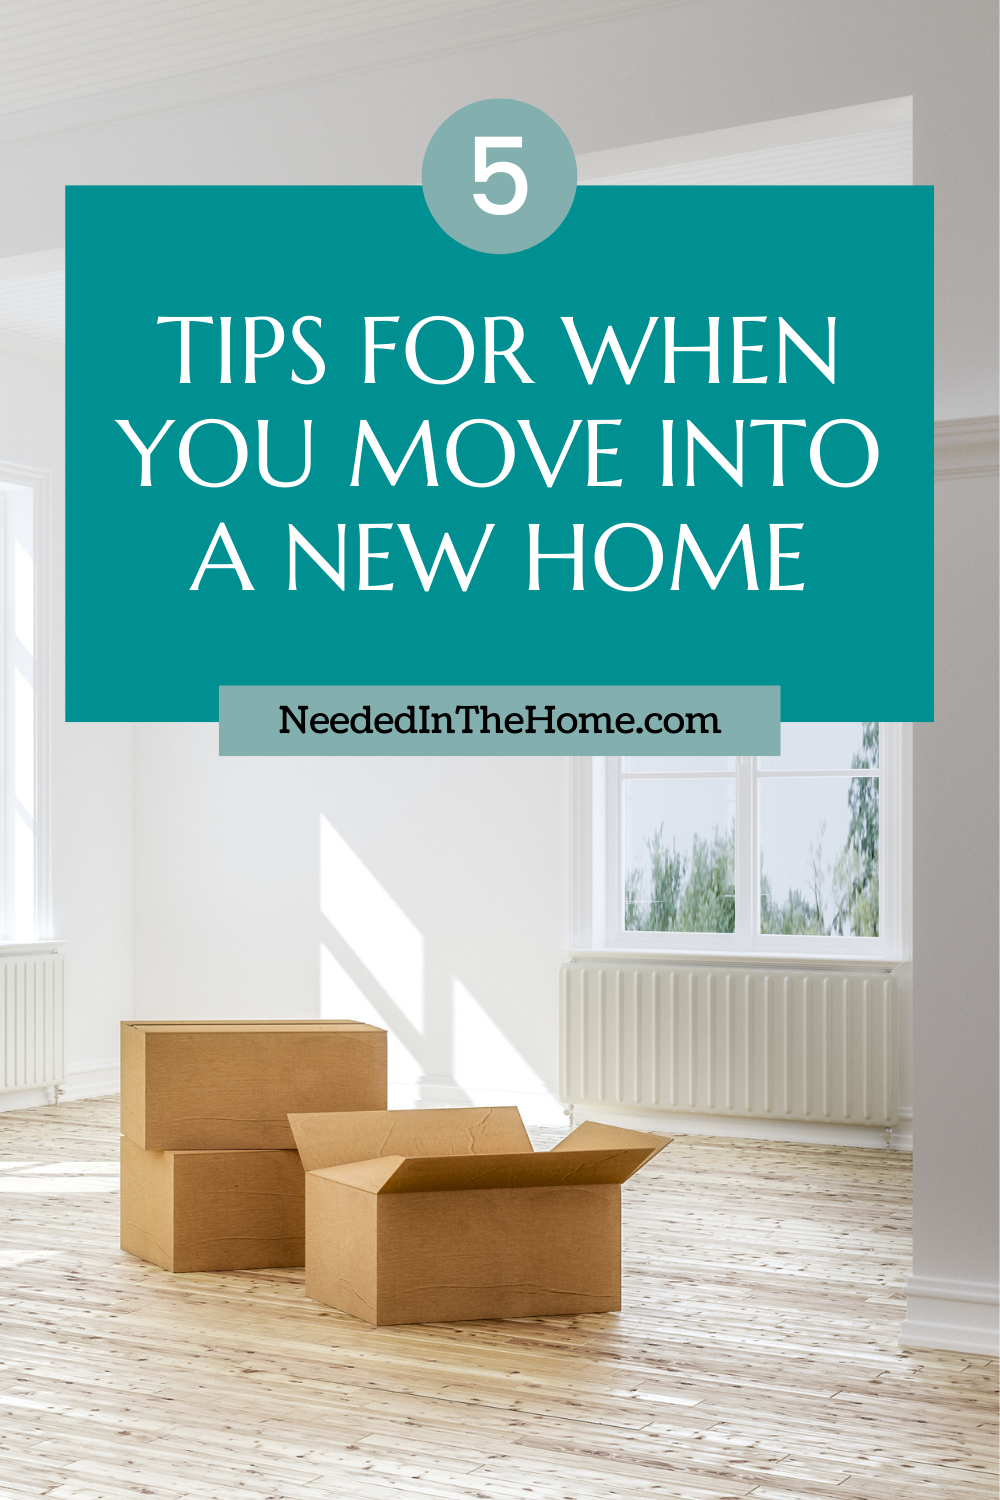 pinterest-pin-description 5 tips for when you move into a new home empty boxes on the floor neededinthehome